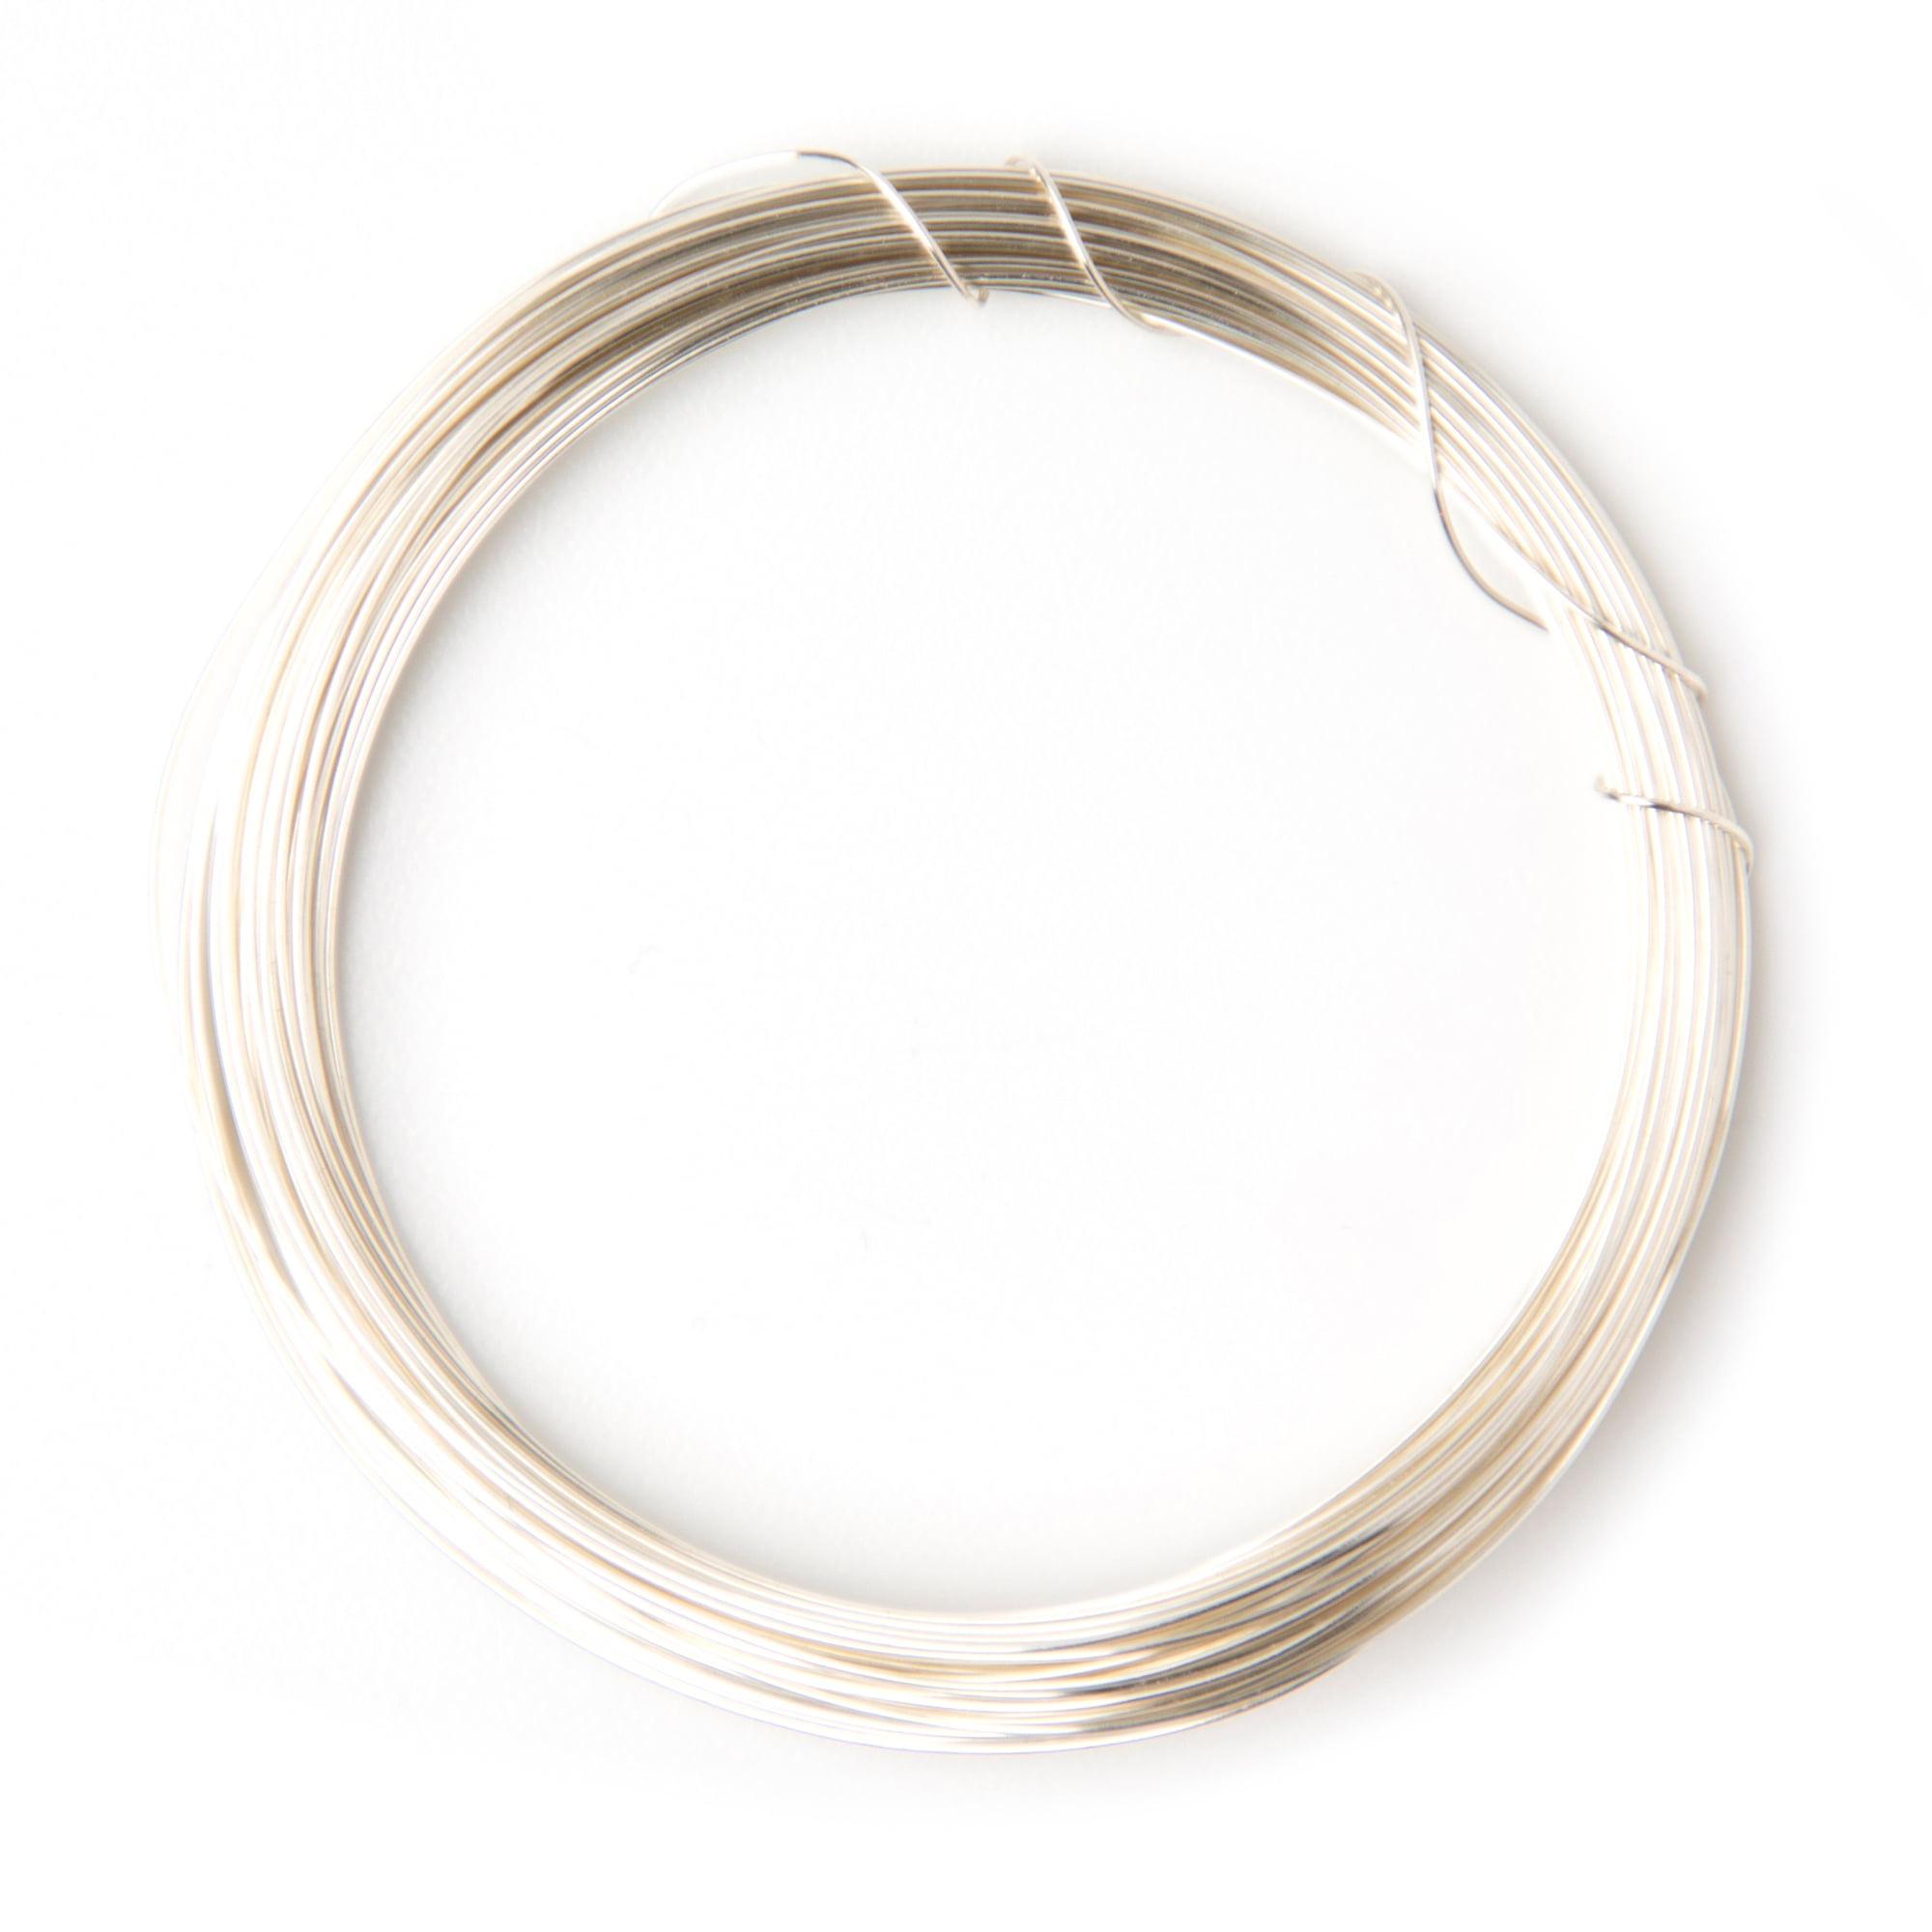 DIY 26 Gauge Silver Plated Jewelry Making Wire